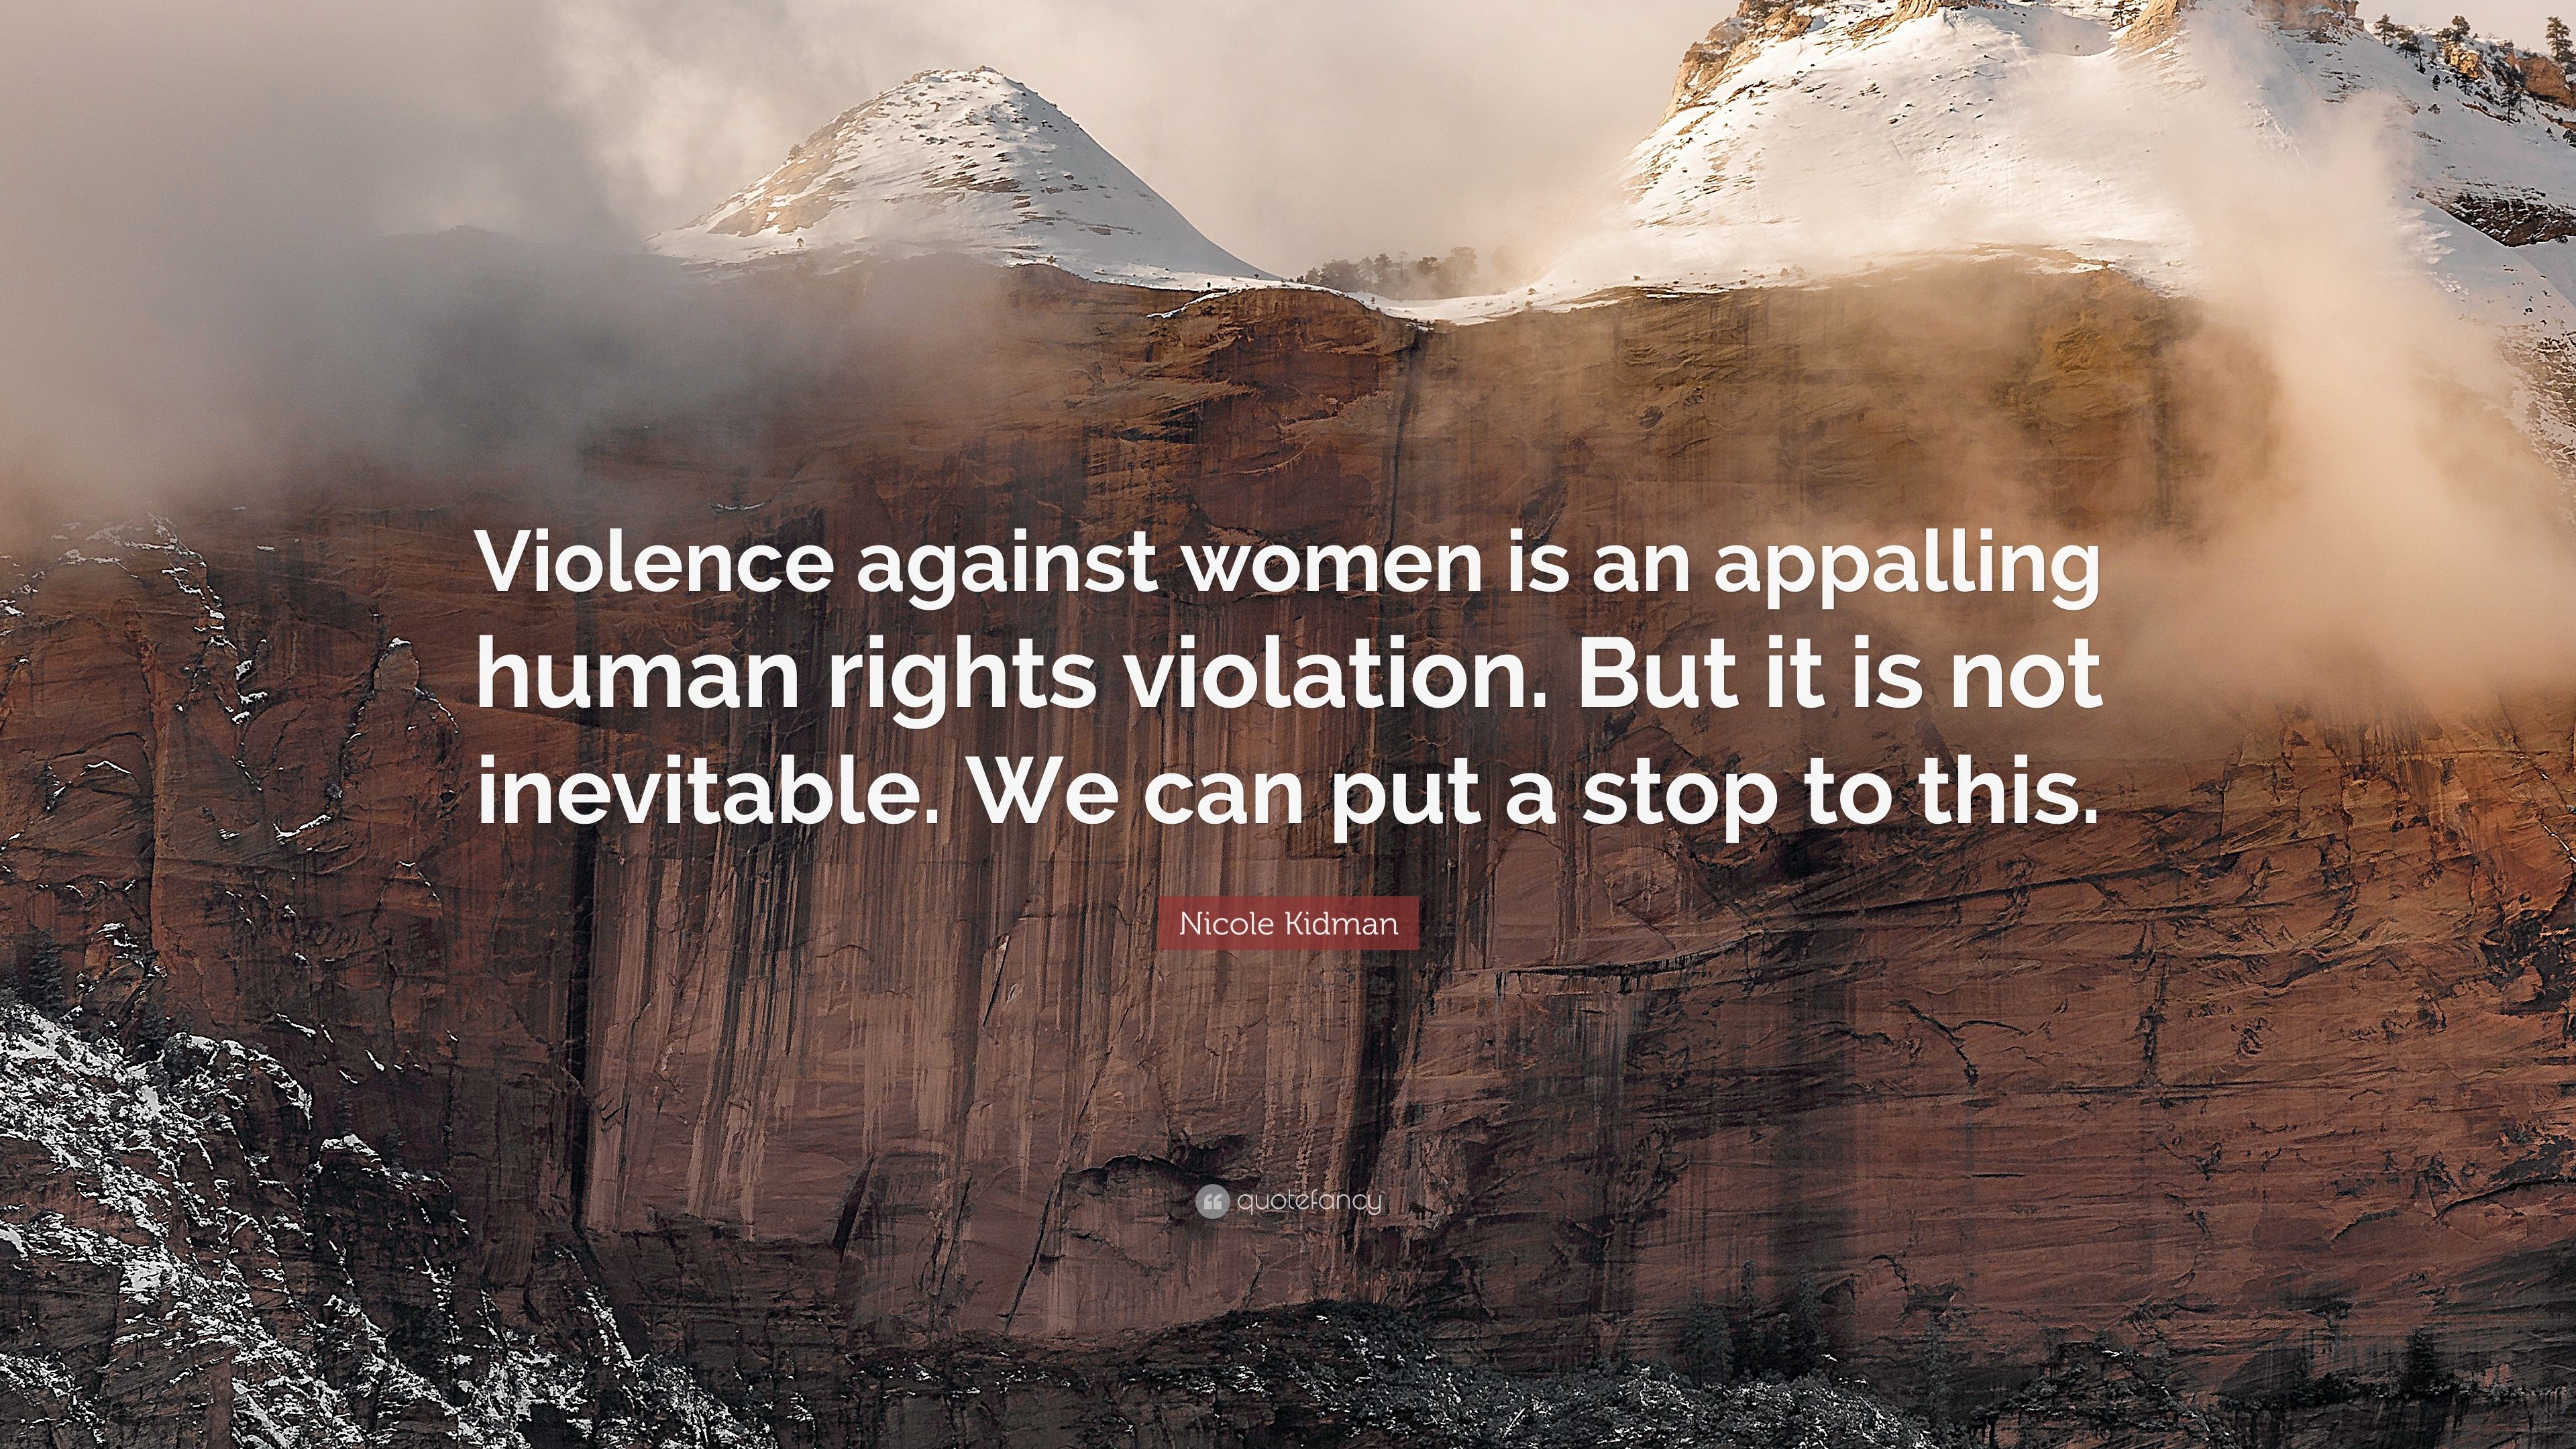 Nicole Kidman Quote: “Violence against women is an appalling human rights violation. But it is not inevitable. We can put a stop to this.” (12 wallpaper)